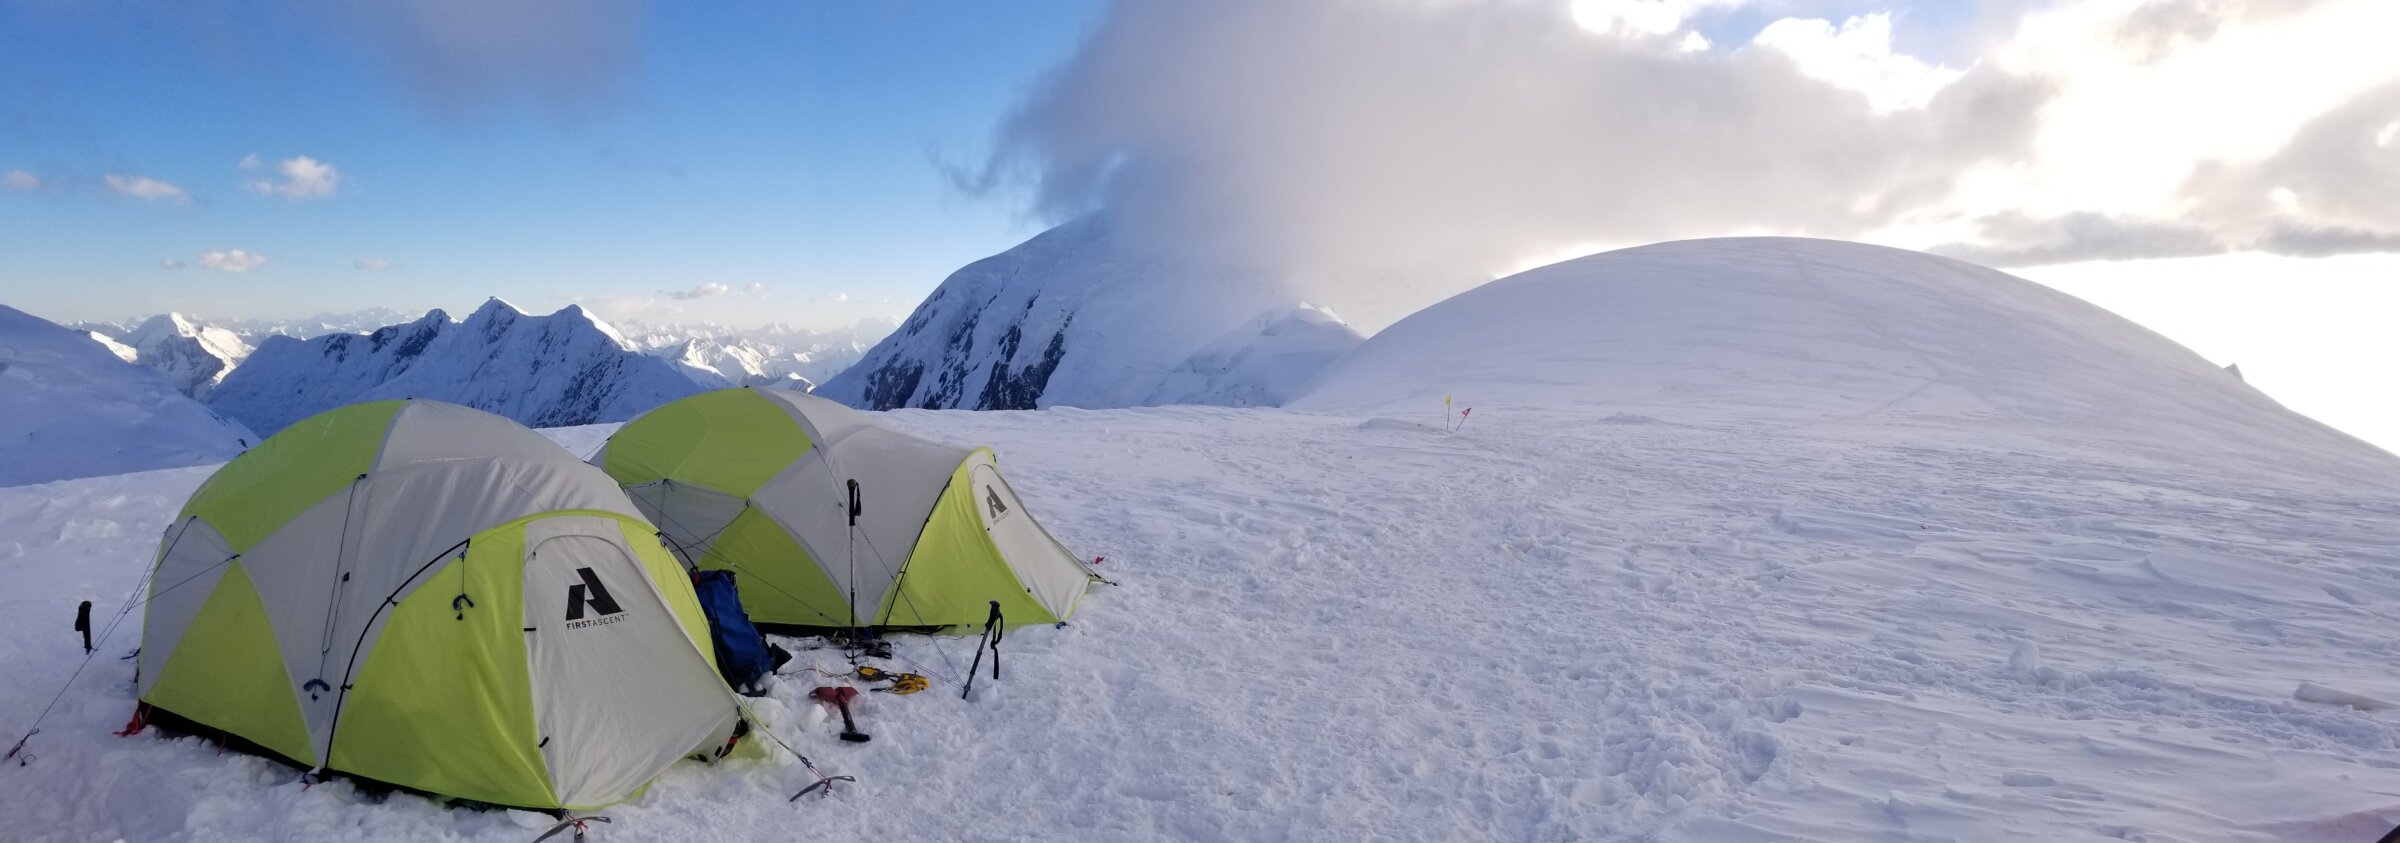 Tent at a high camp on Peak Lenin during a guided expedition with Alpenglow Expeditions.